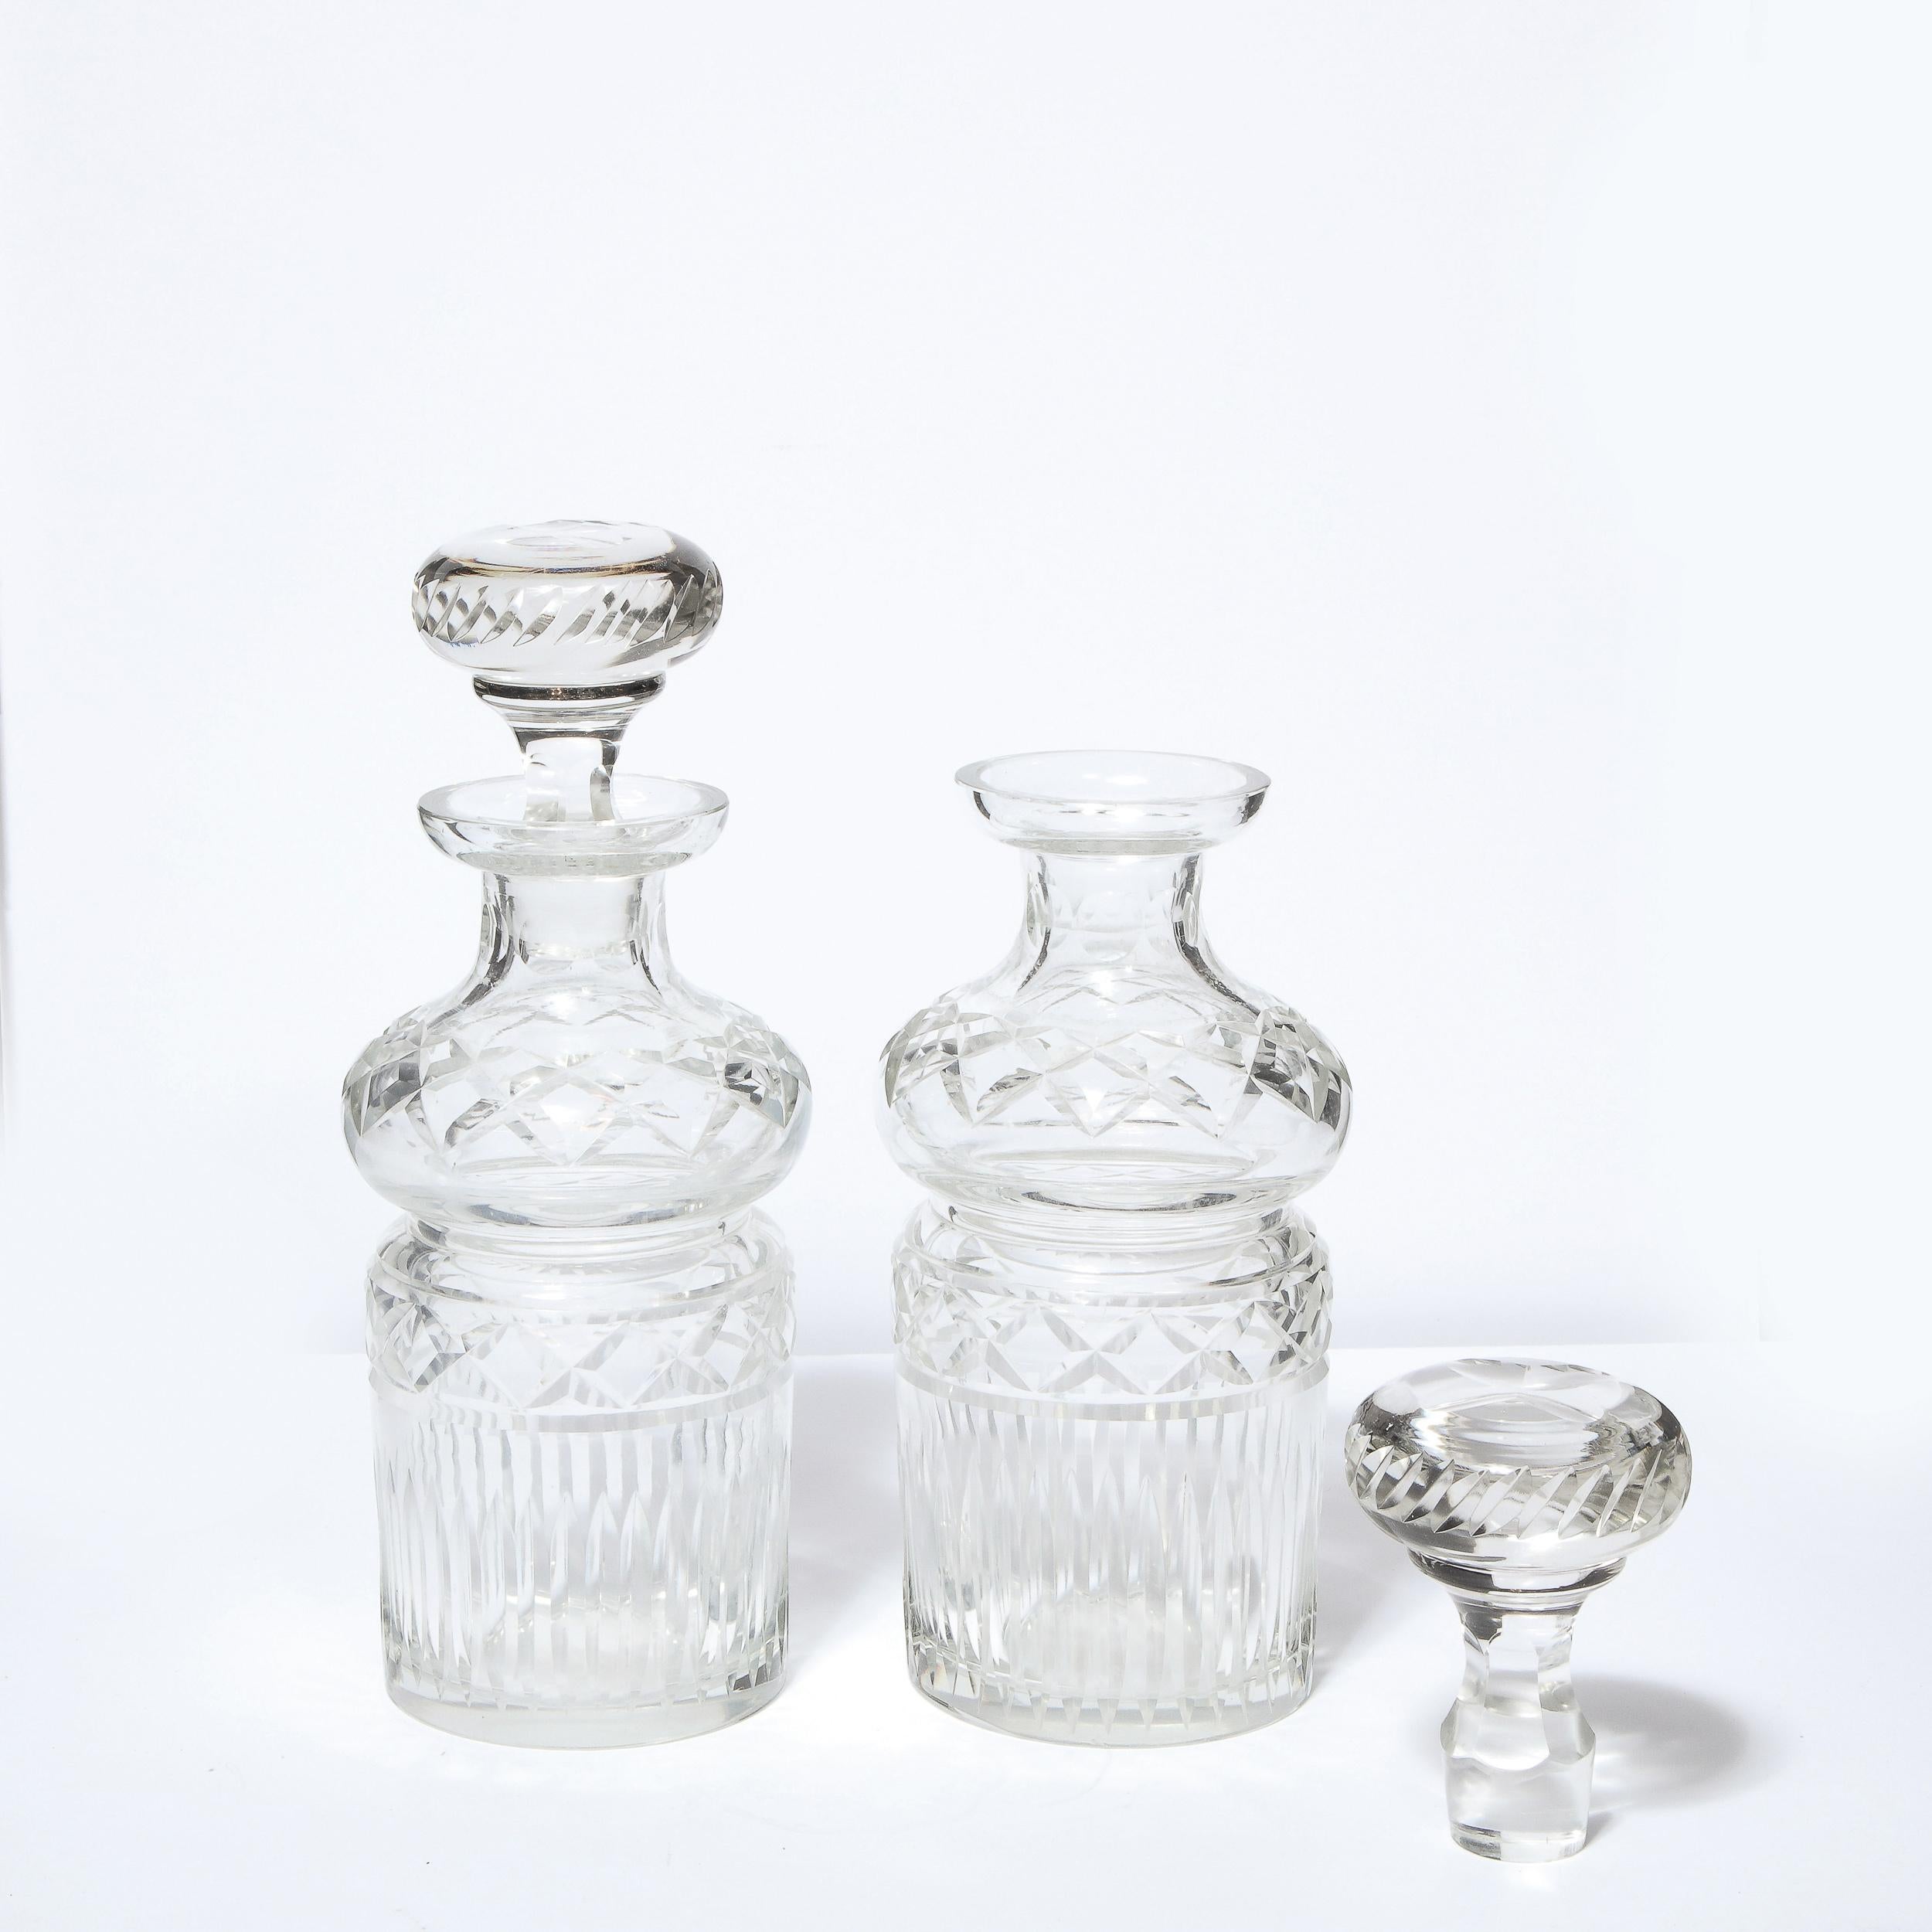 Pair of Mid-Century Modern Etched Translucent Crystal Decanters 2